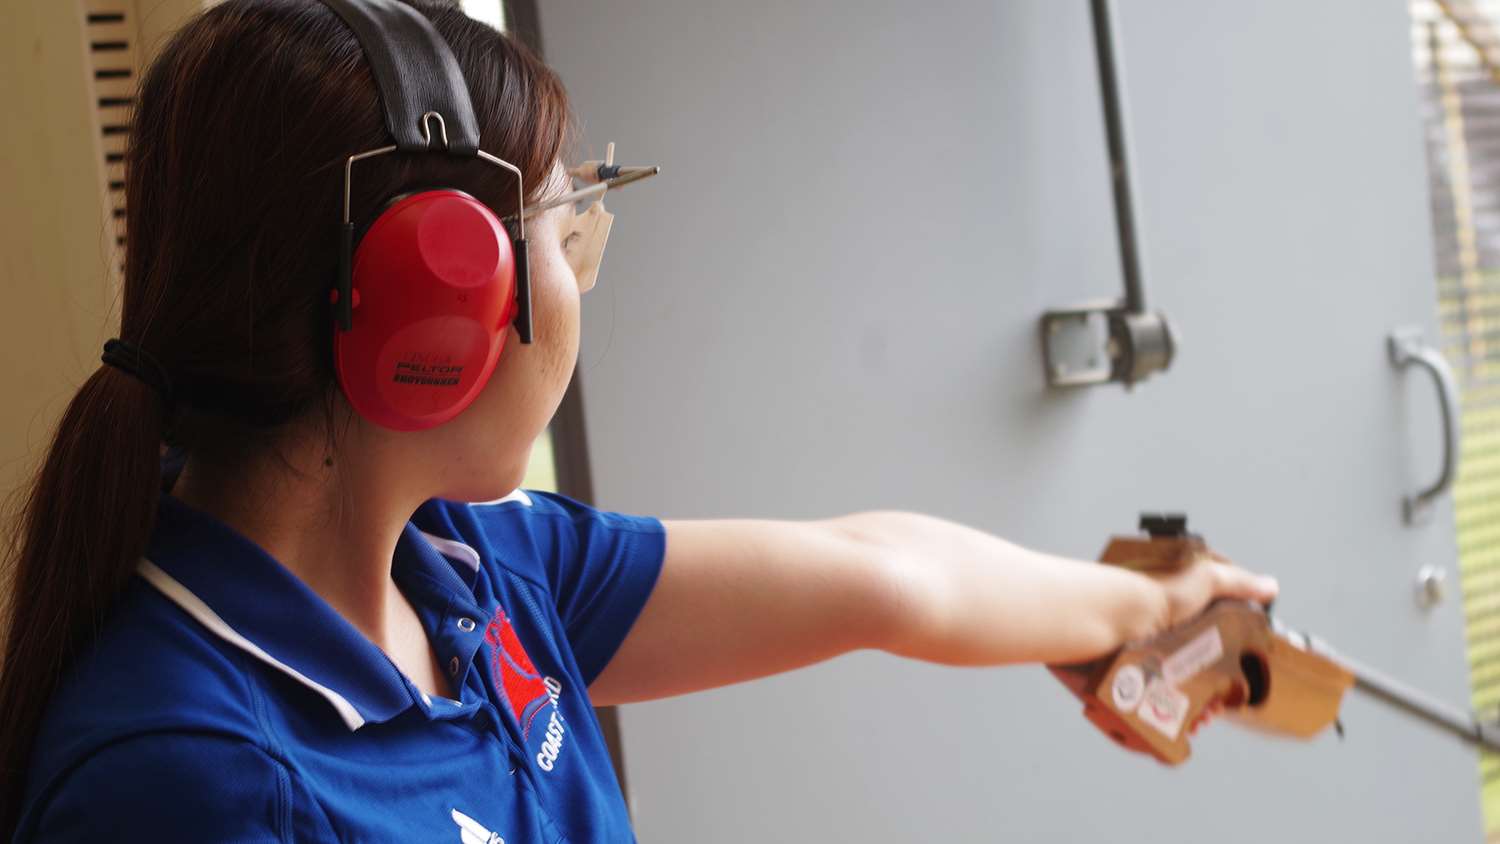 Helen Oh, NRA Intercollegiate Pistol Champion for 2018 and 2019